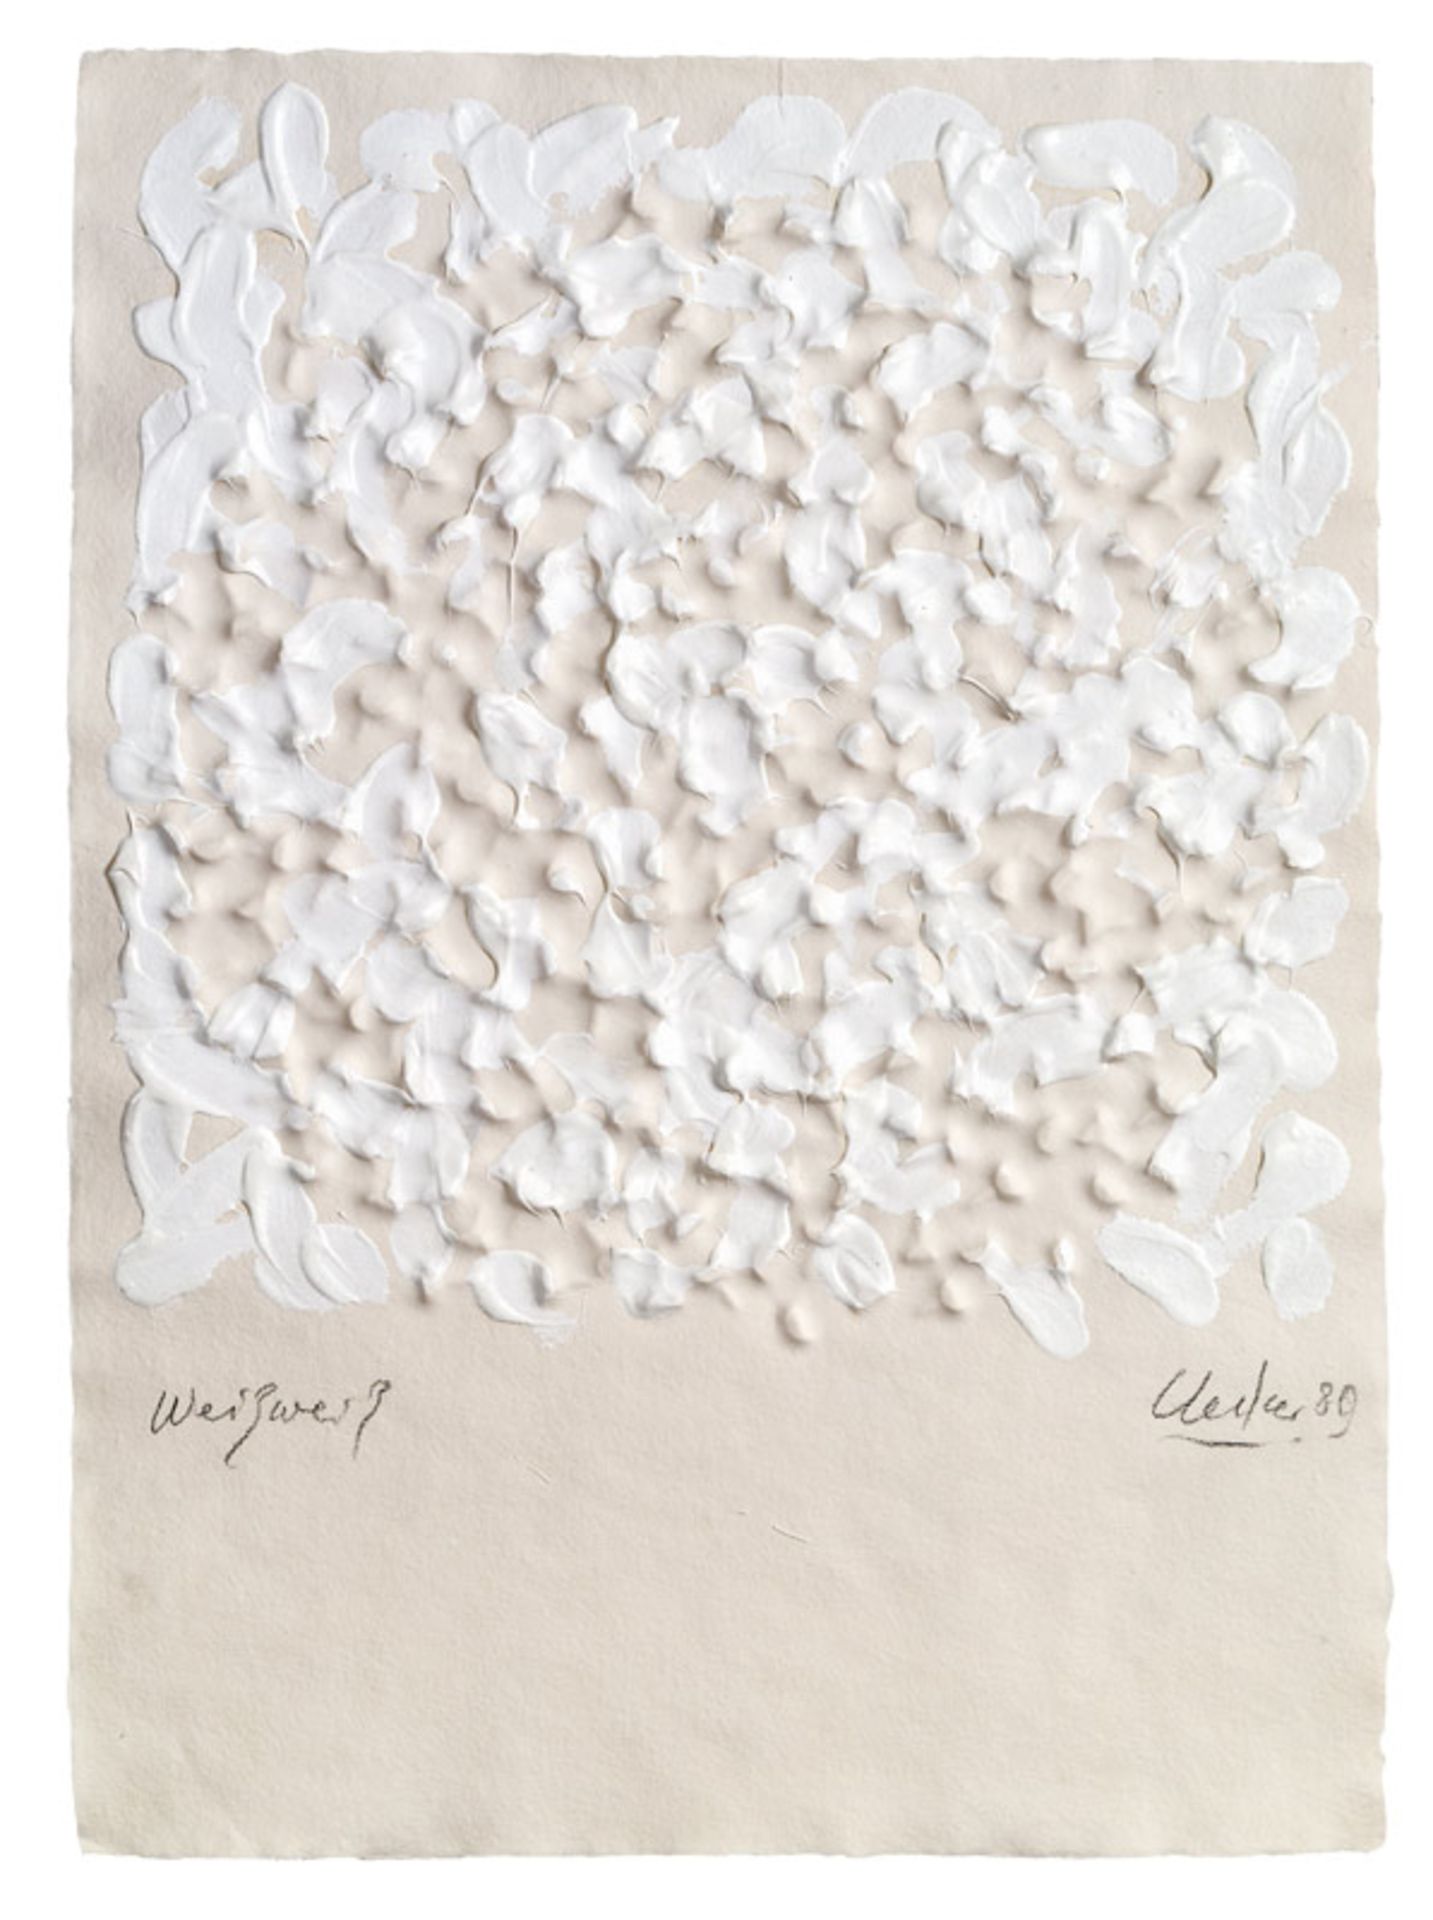 Günther Uecker * Weißweiß, 1989  embossed printing on laid paper, painted; unframed; ca. 45 × 33 cm